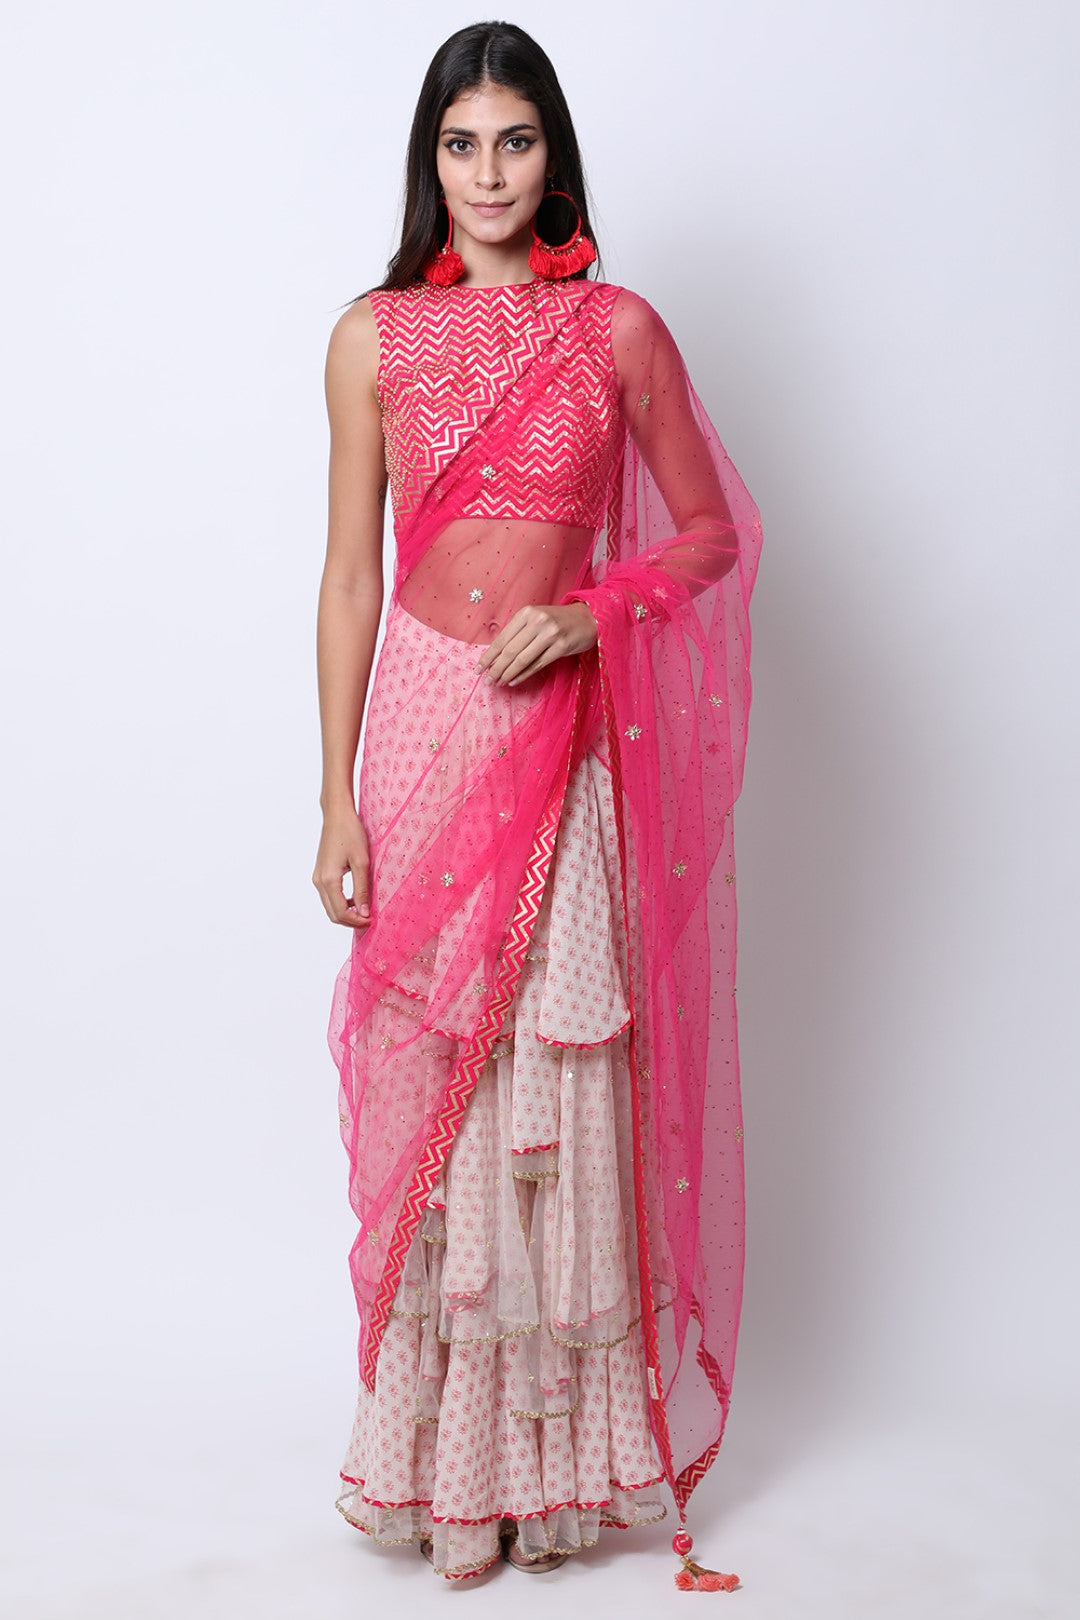 Rani Pink blouse with ghee print double layer godets skirt with attached embroidered palla.